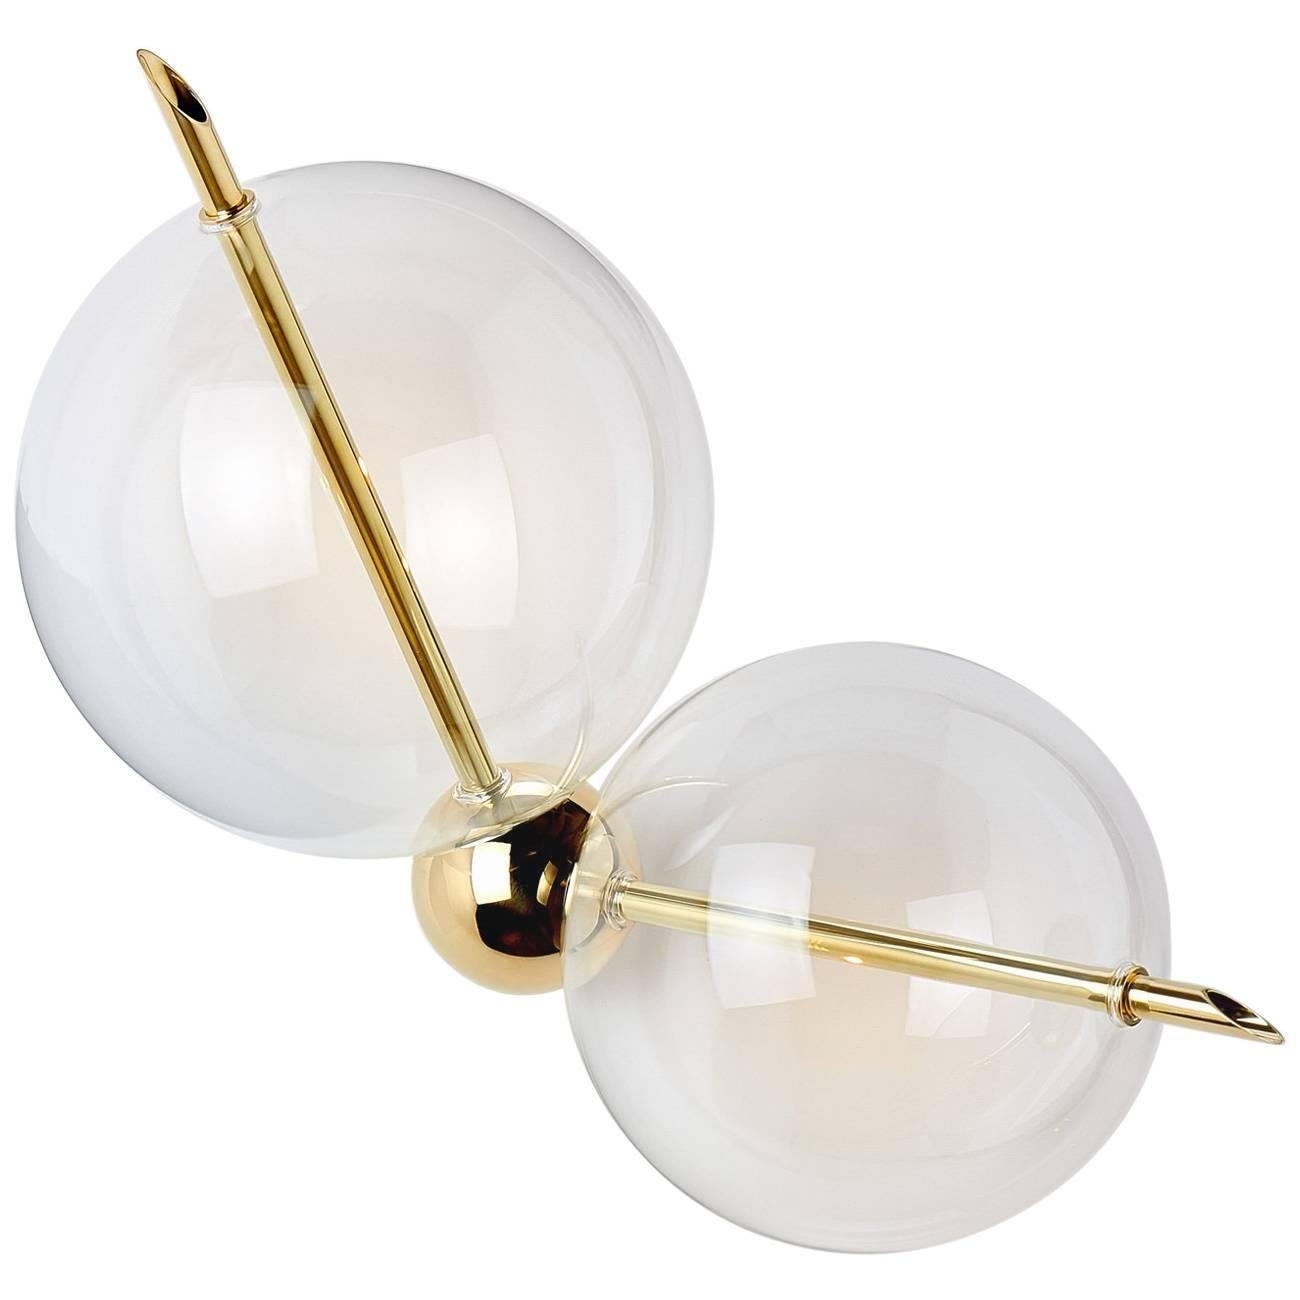 Lune Two Lights Contemporary Sconce / Wall Light Polished Brass Handblown Glass